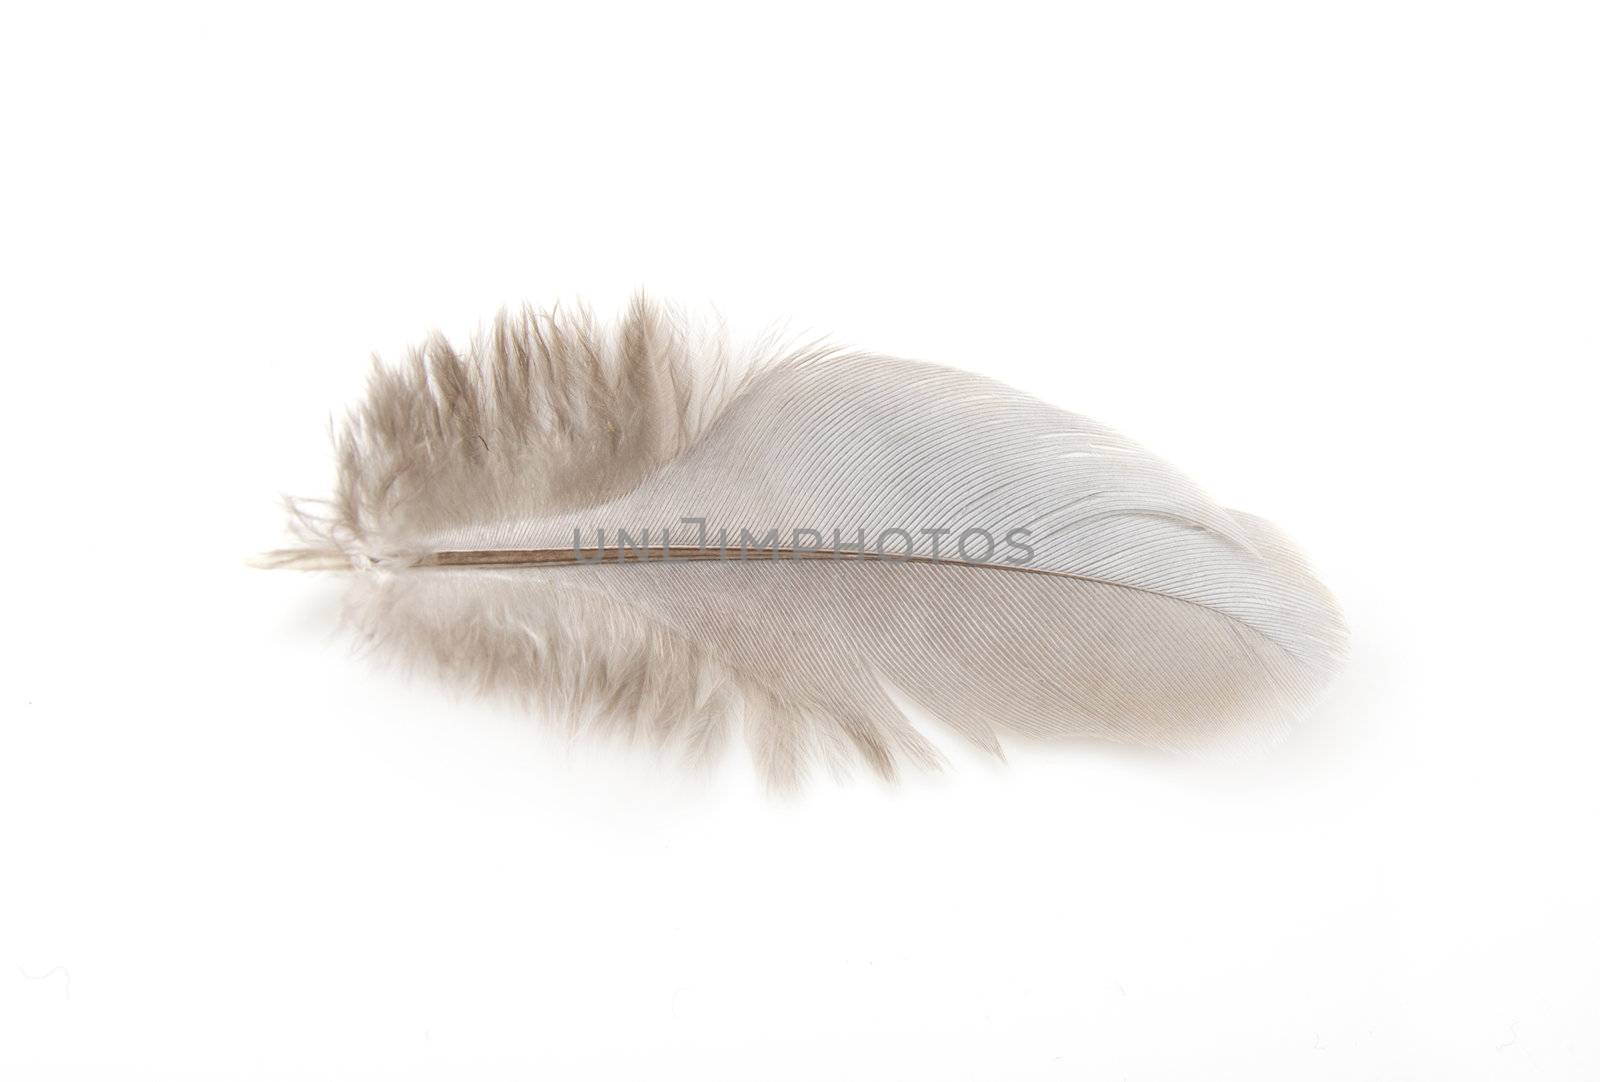 Feather of a pigeon on a white background by schankz